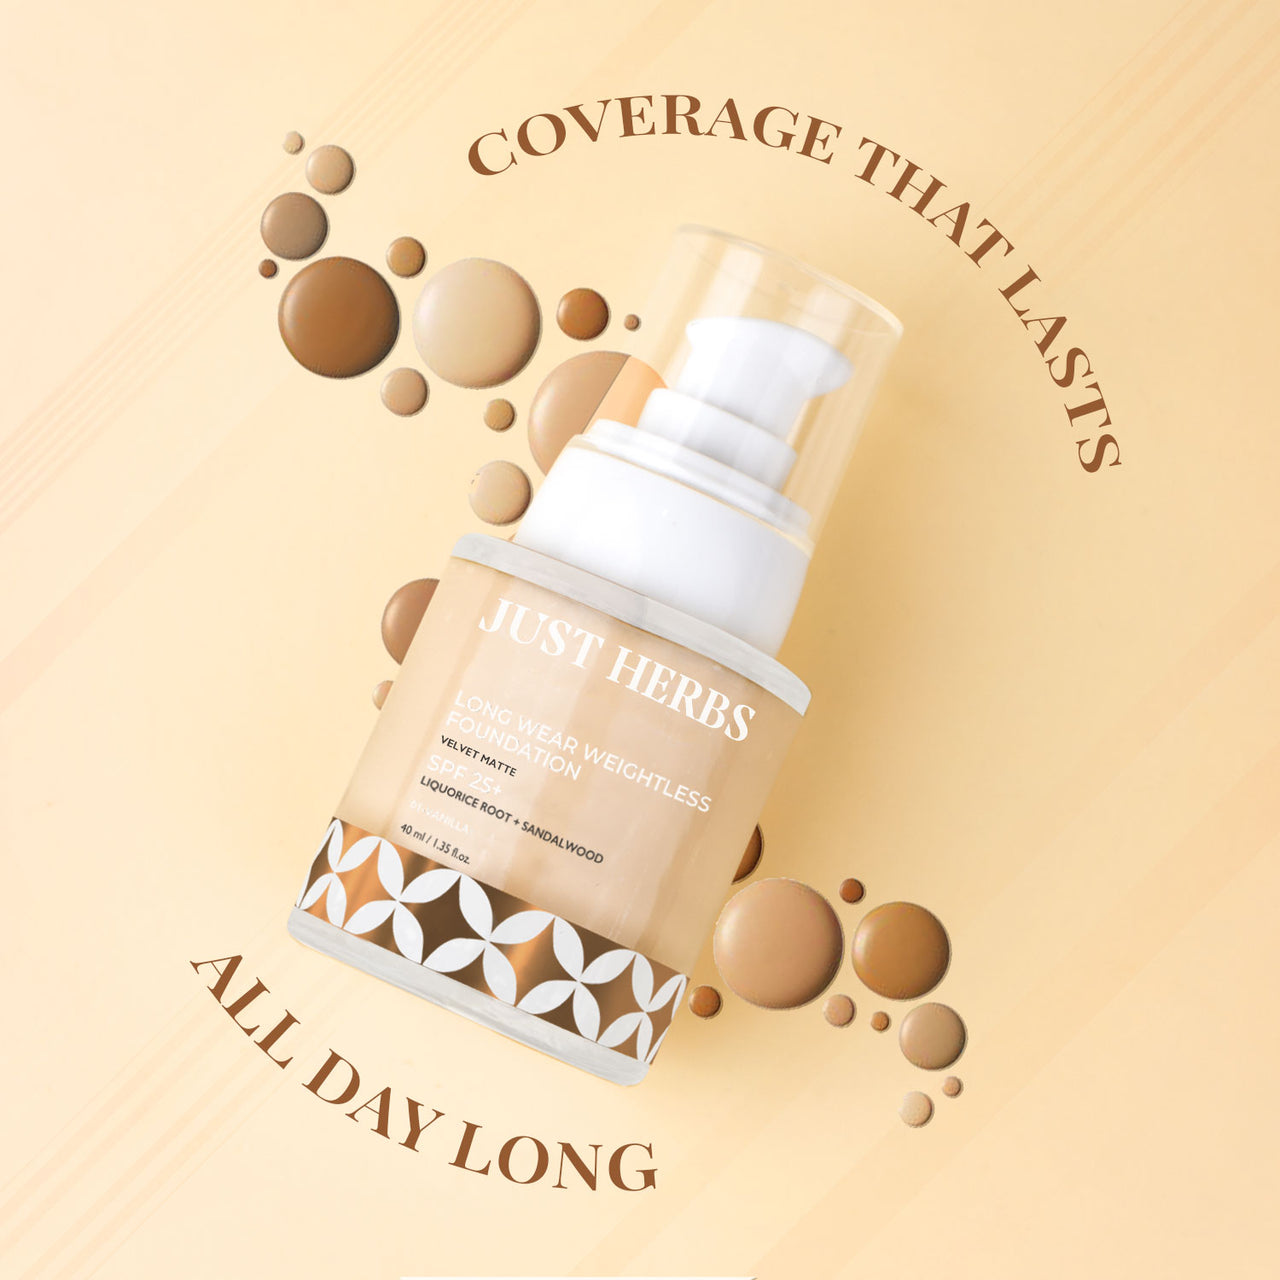 Long Wear Weightless Foundation with Liquorice Root and Sandalwood